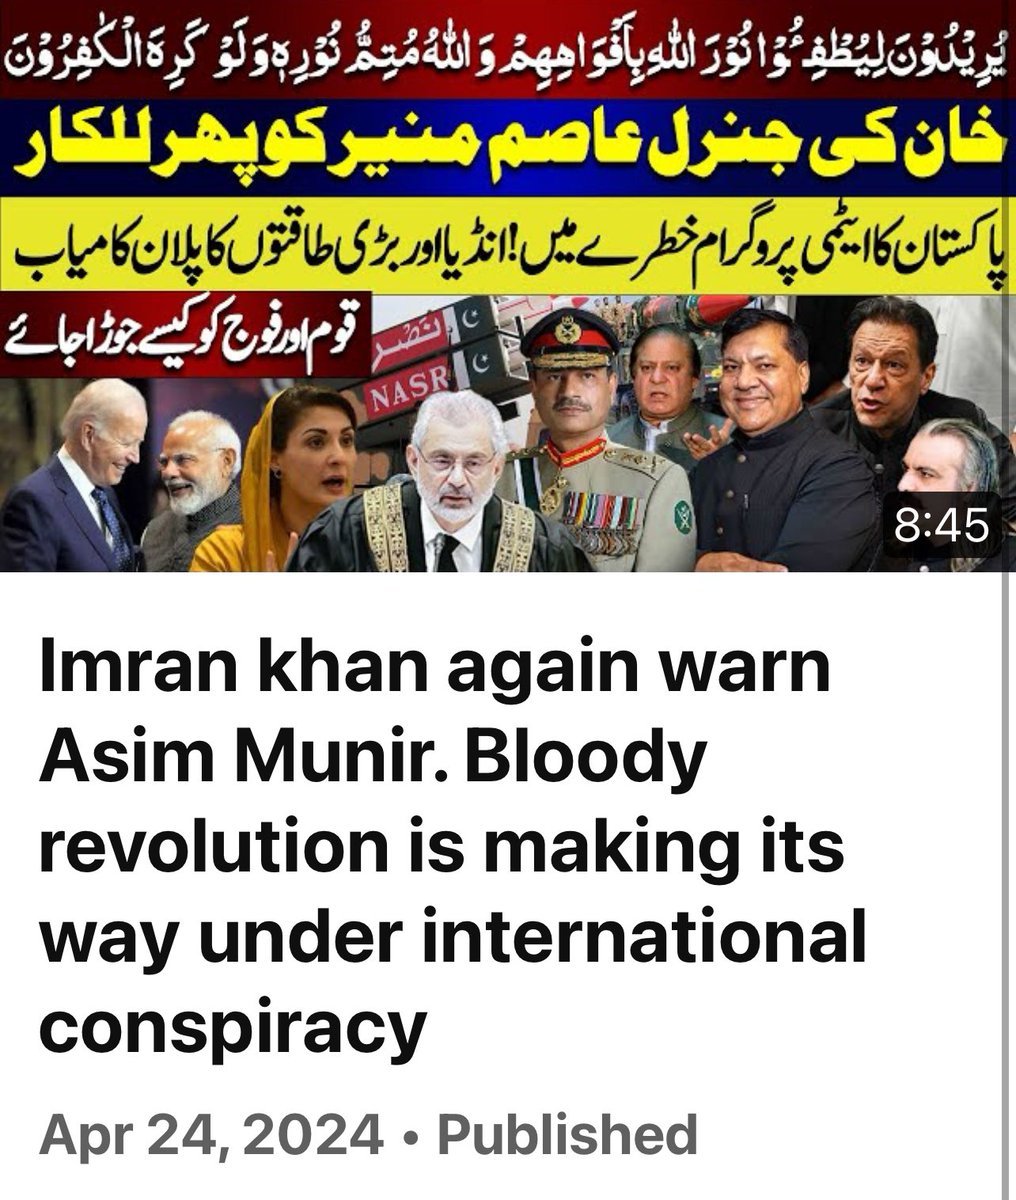 All the Glory is to Allah, Qazi Faiz Esa and Asim Munir type people get badly humiliated in this world and in here after. We have seen fate of every pharo, Yazid, Ayyoub, Zia, Musharraf, Bajwa? We’ll soon see more @PTIofficial pay attention youtu.be/DRPrEgwMXIw